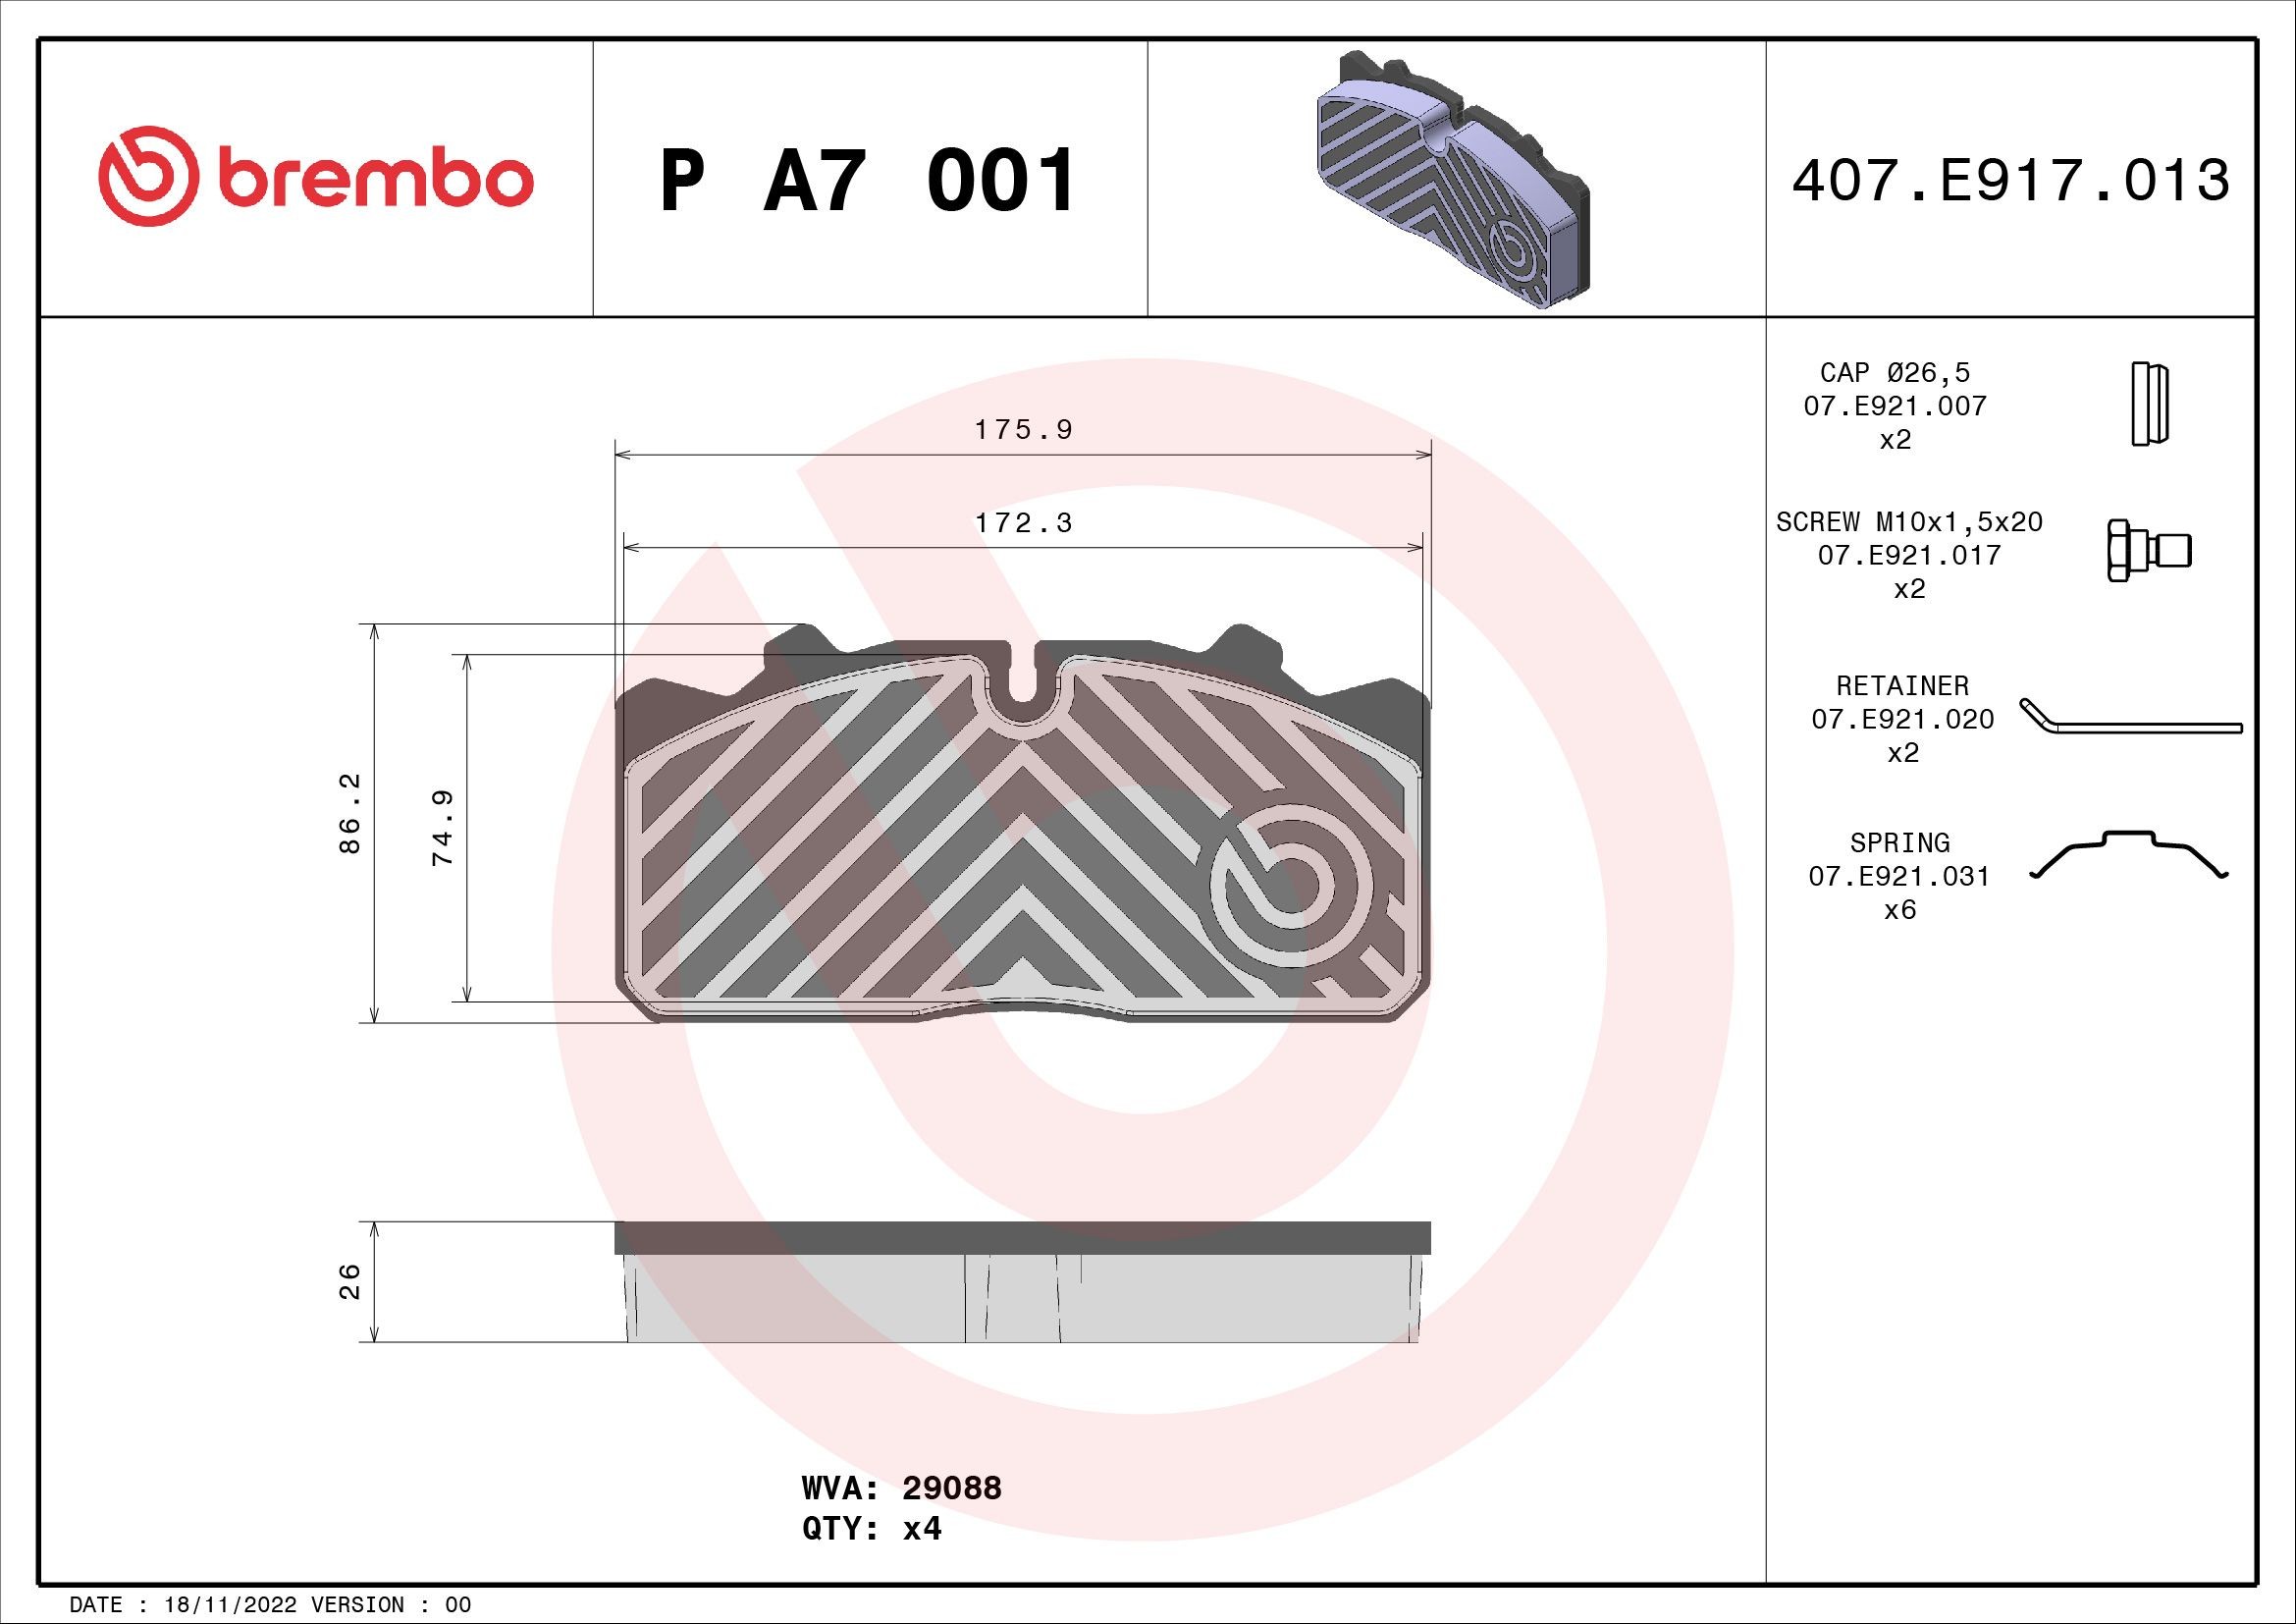 BREMBO P A7 001 Brake pad set prepared for wear indicator, with accessories